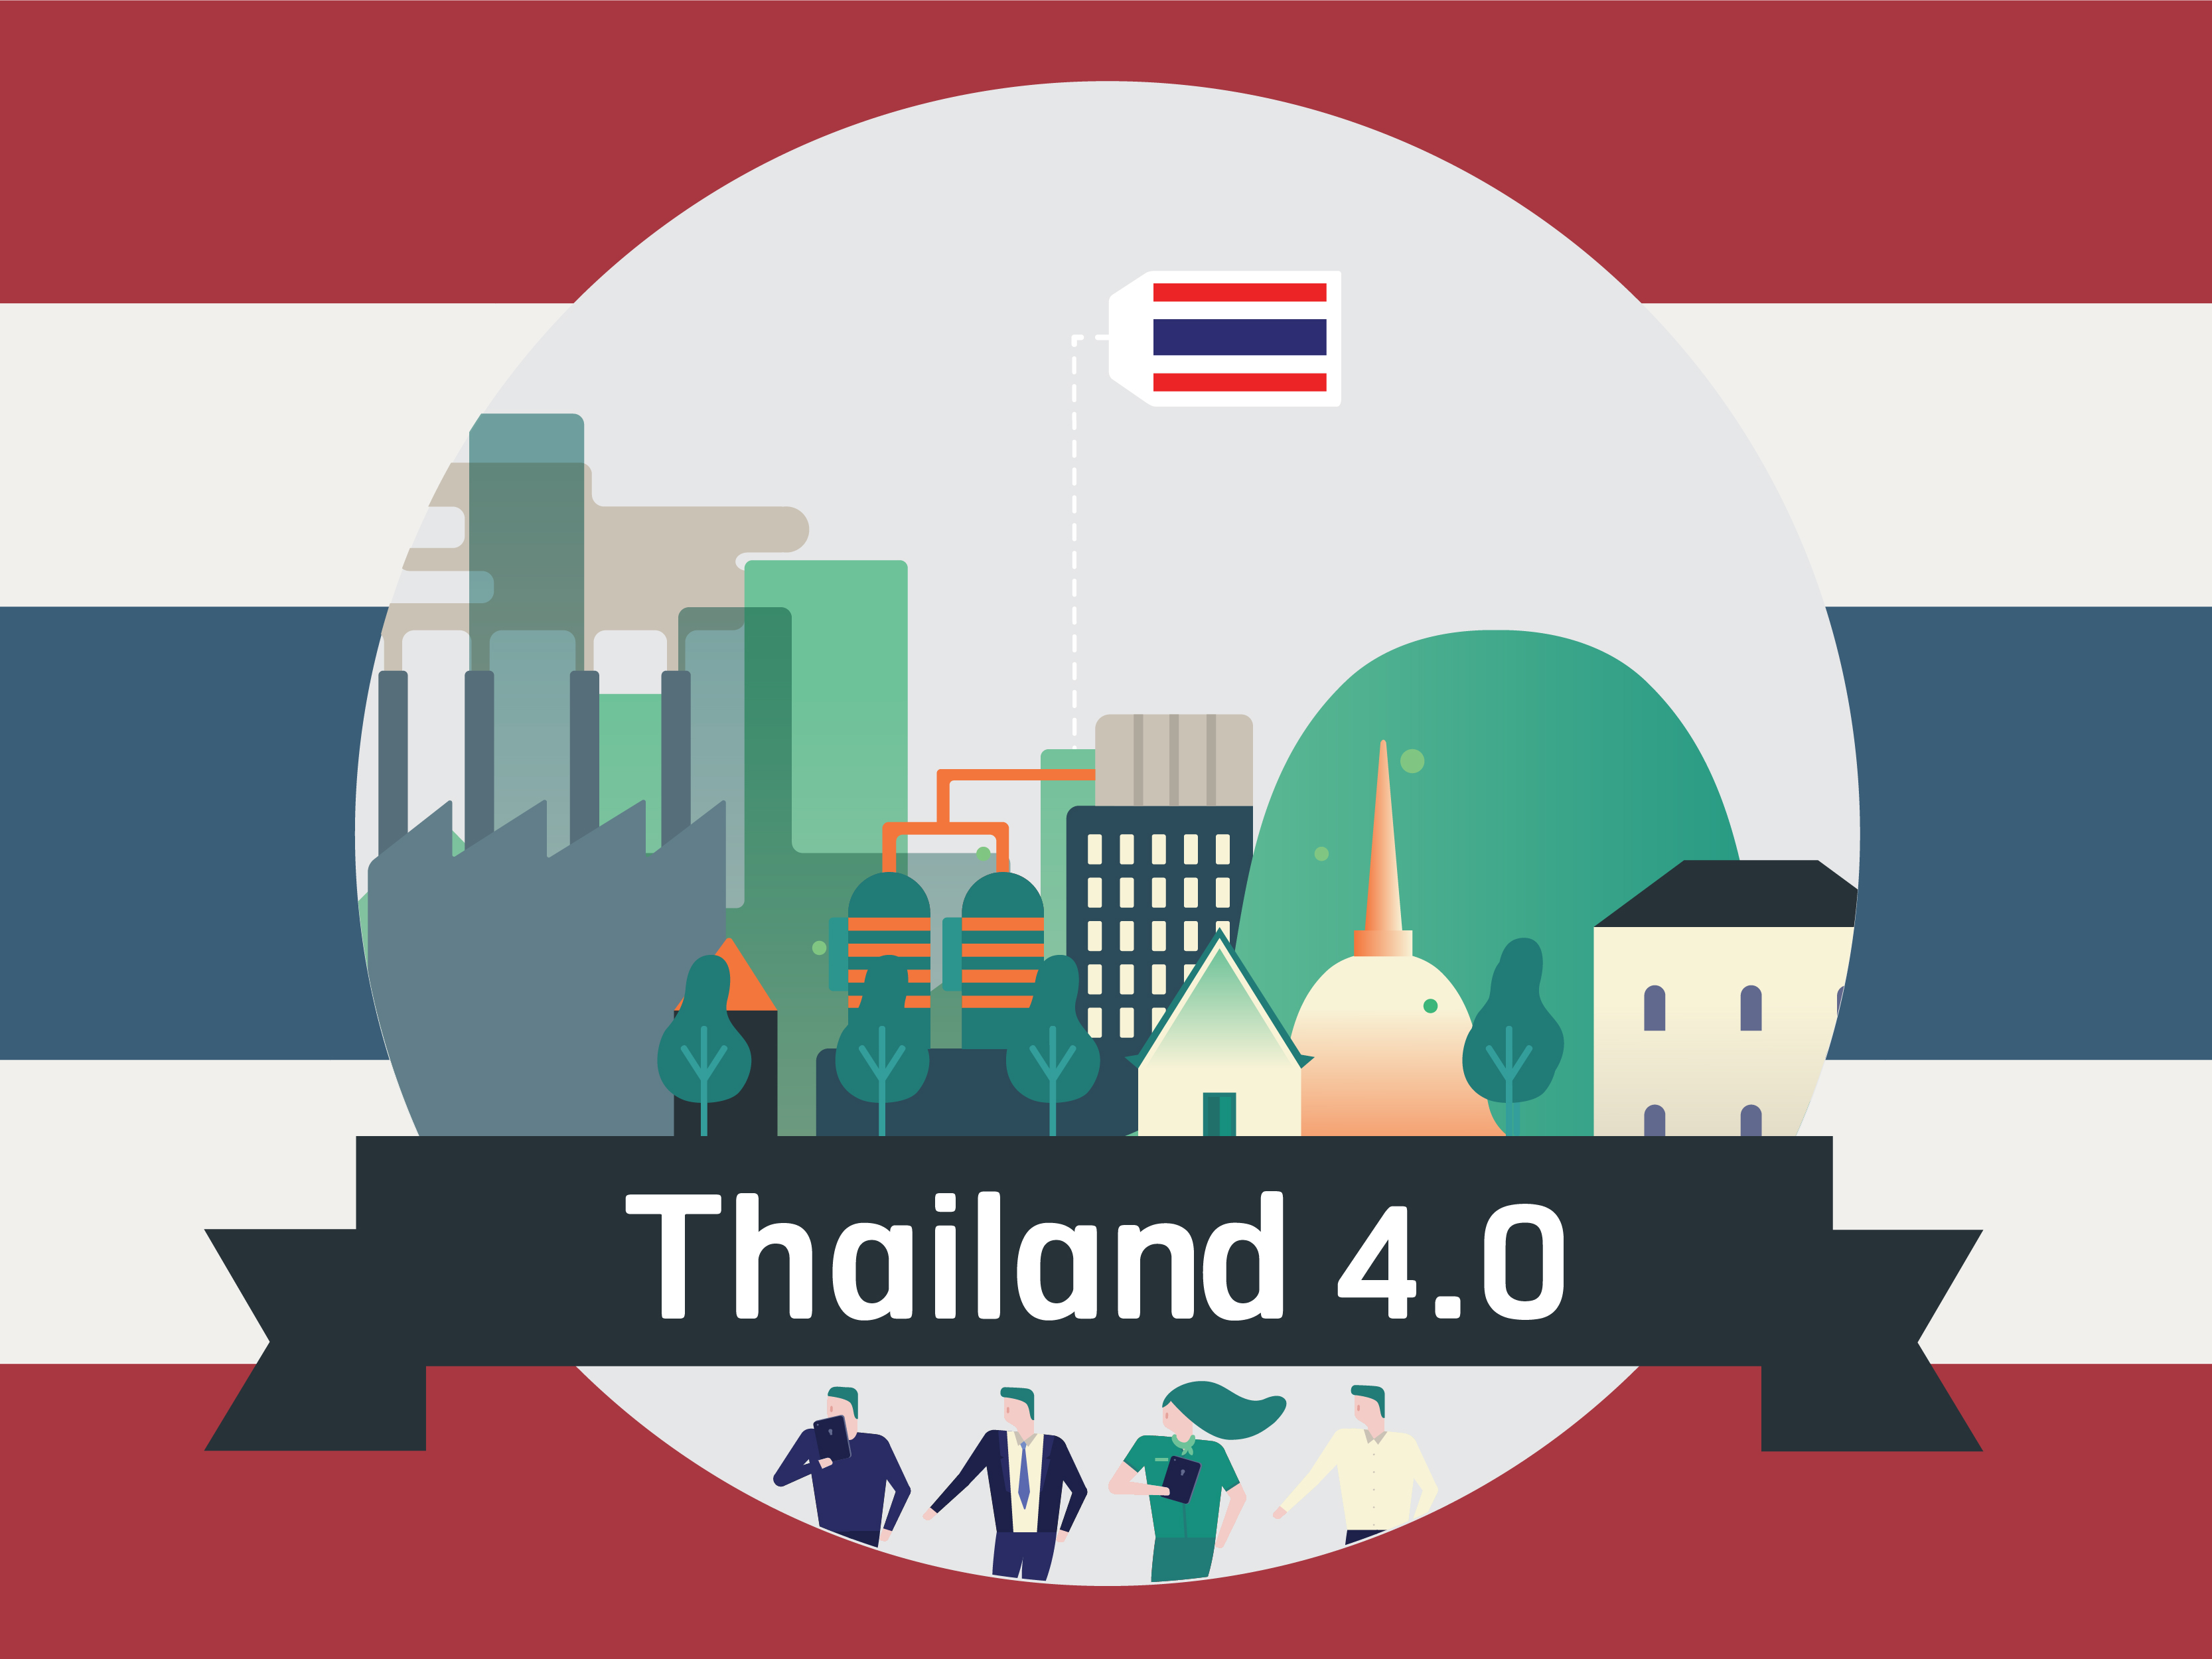 Innovation Hubs Project for Creating Innovation-Based National Economy under Thailand 4.0 Policy